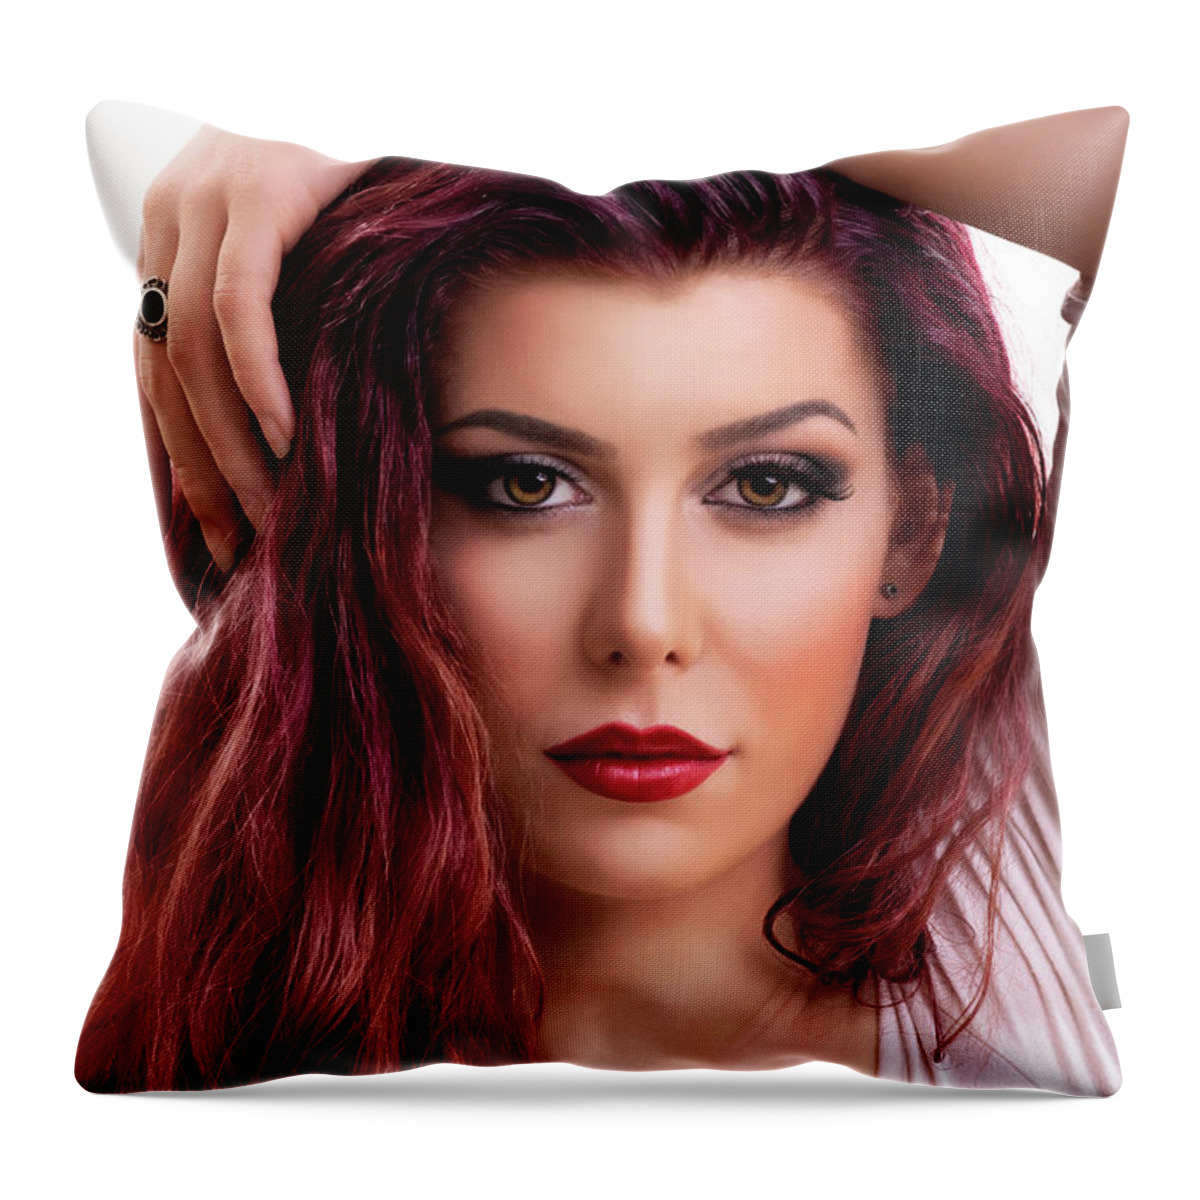 Make Up Throw Pillow featuring the photograph Beauty portrait of woman with smokey makeup by Mendelex Photography